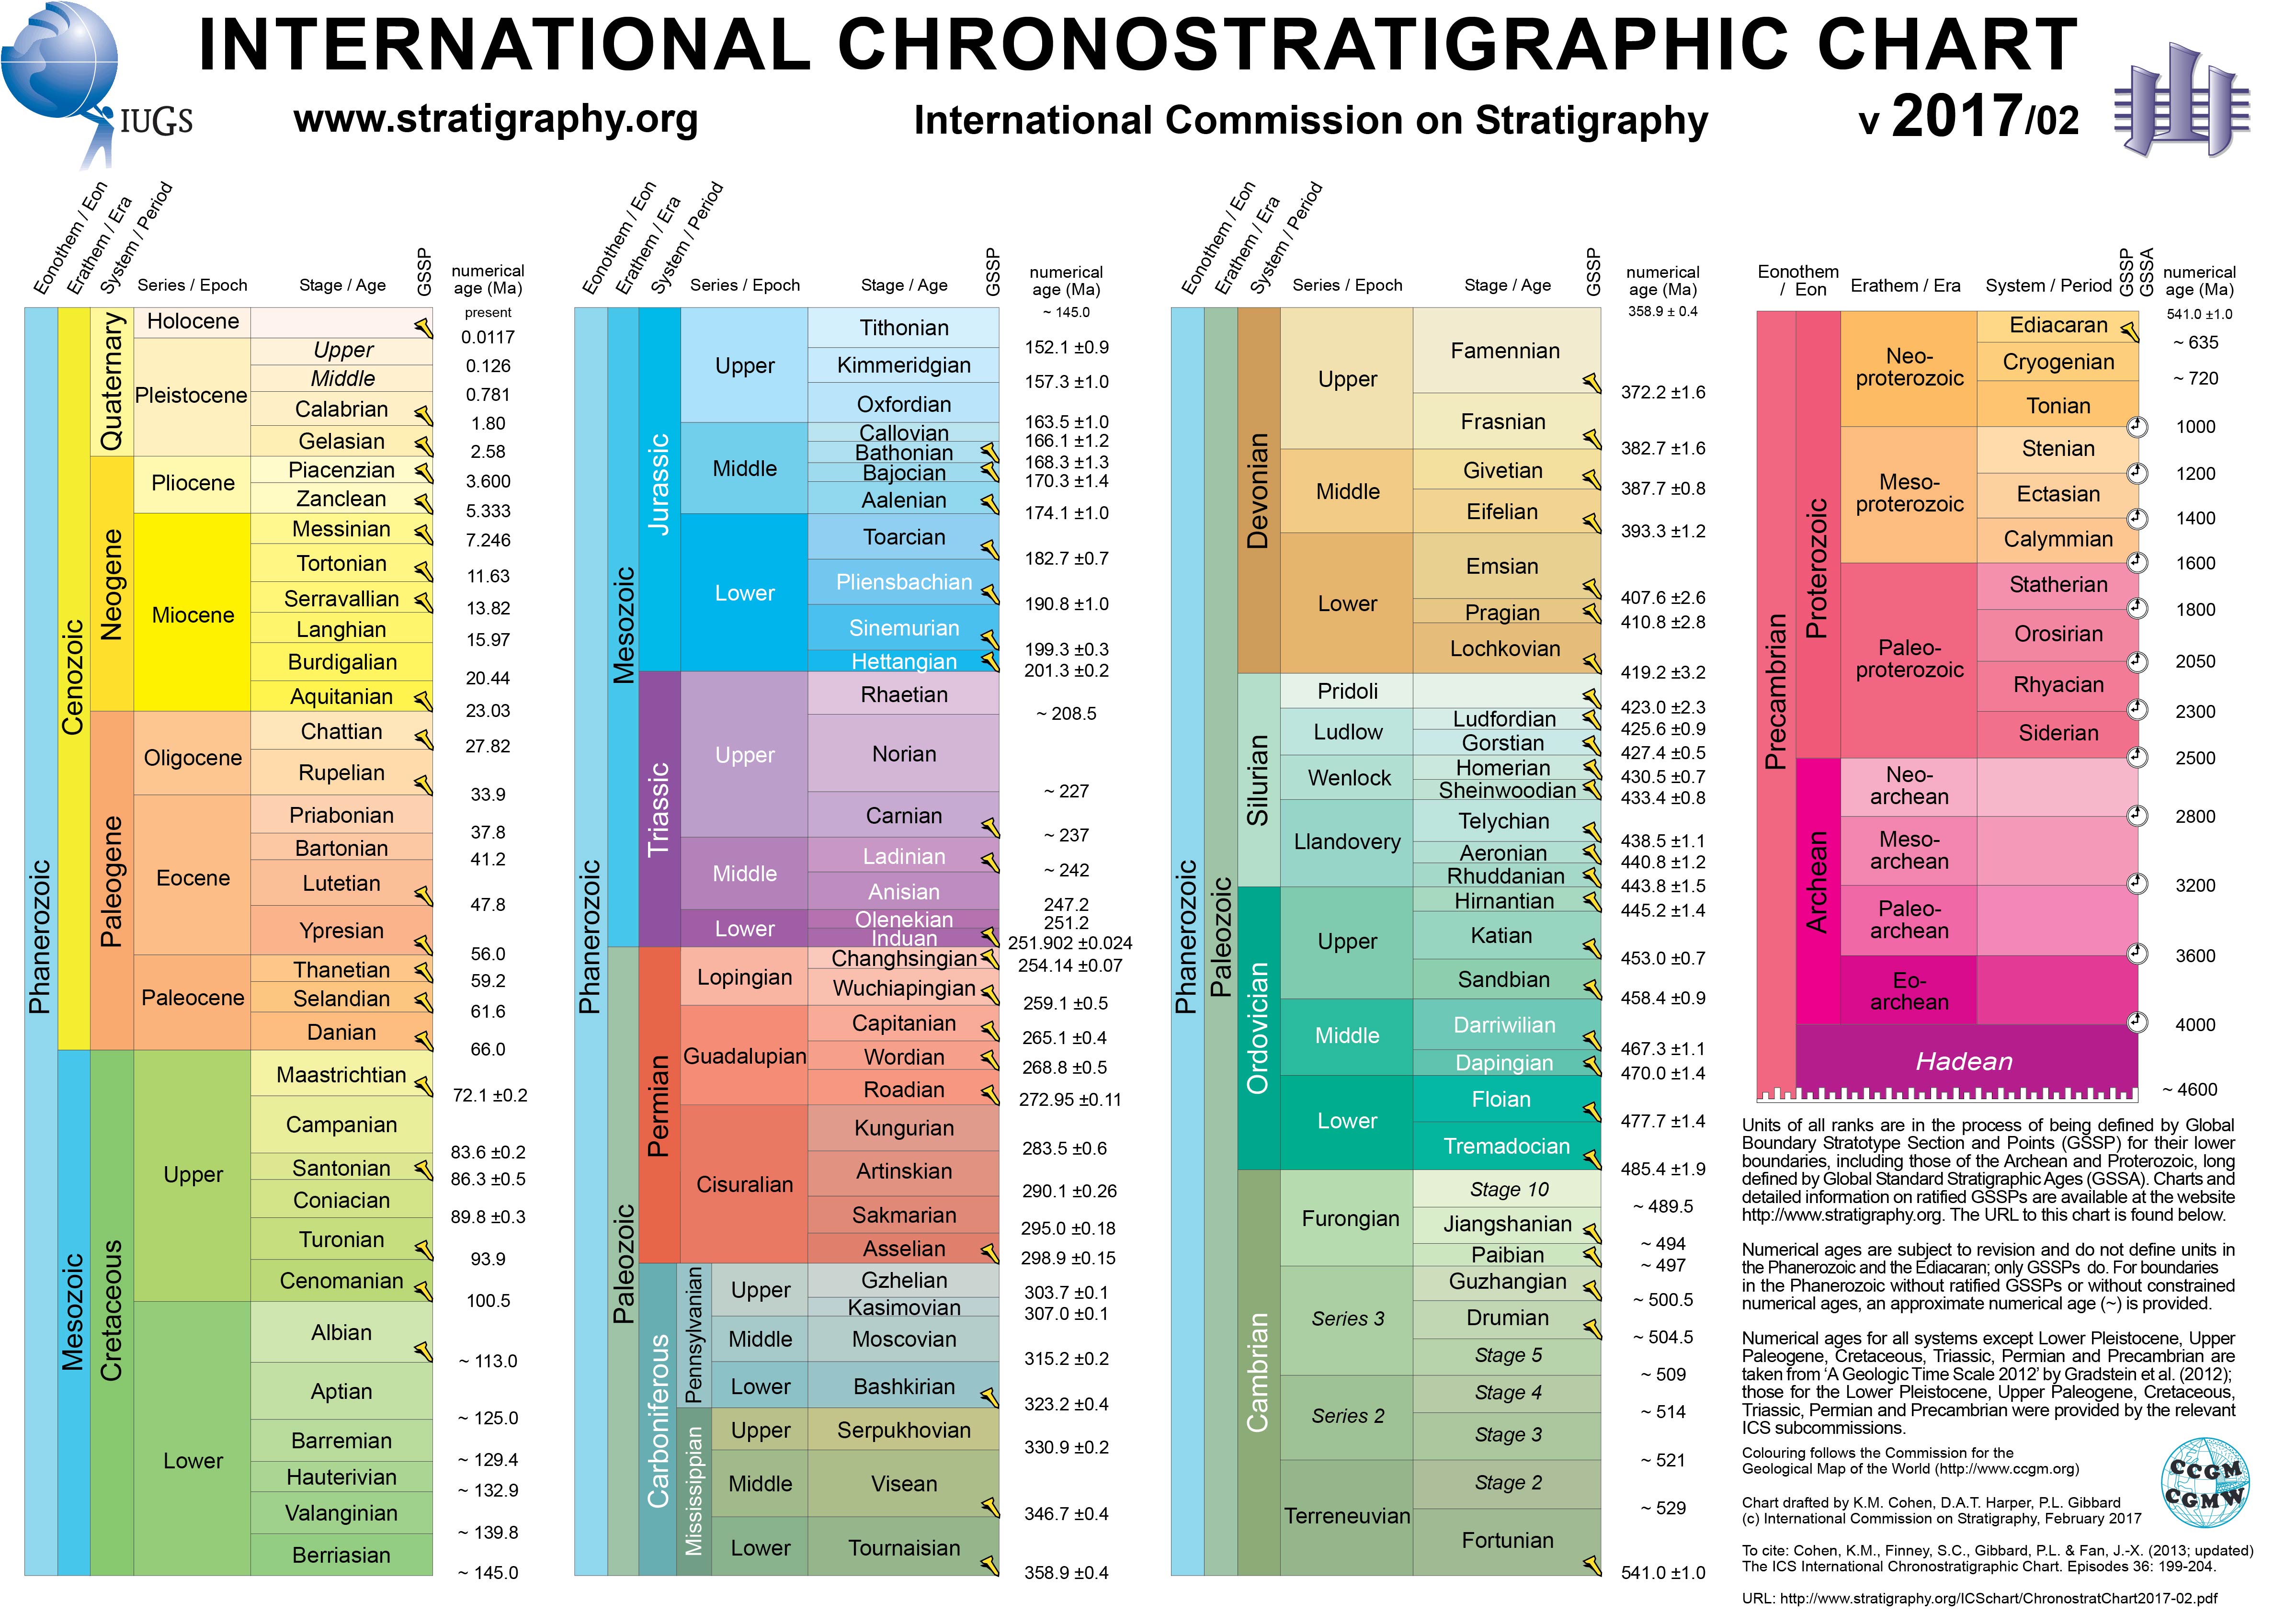 http://www.stratigraphy.org/index.php/ics-chart-timescale